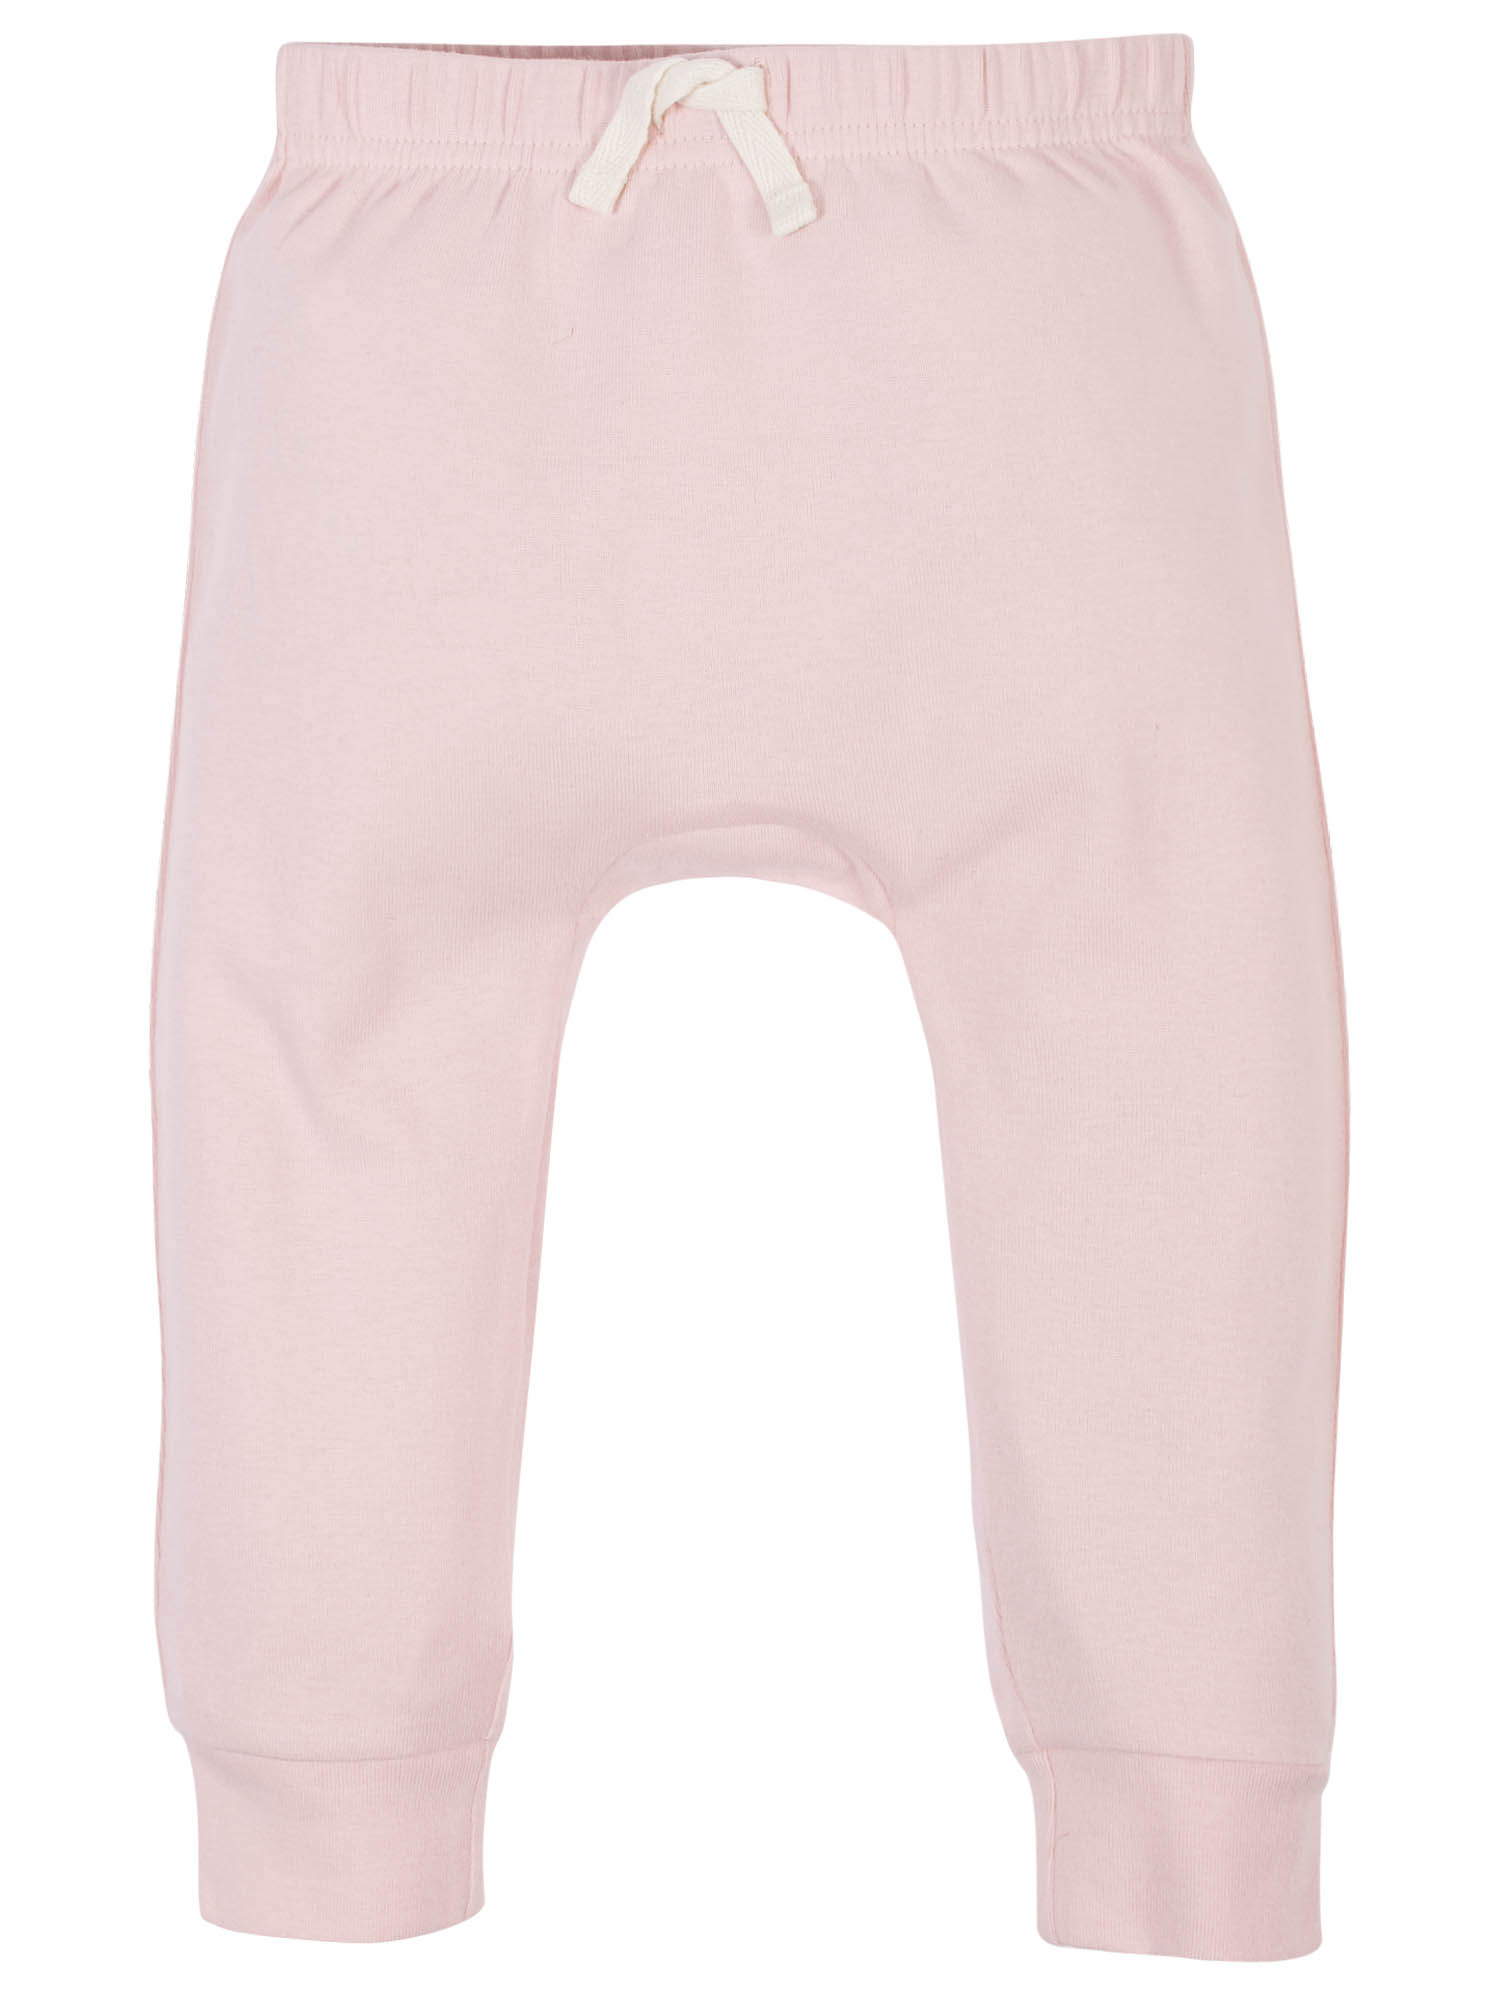 Modern Moments by Gerber Newborn Baby Girl Long Sleeve Bodysuit & Pant Outfit Sets, 6-Piece (Newborn-12 Months) - image 5 of 15